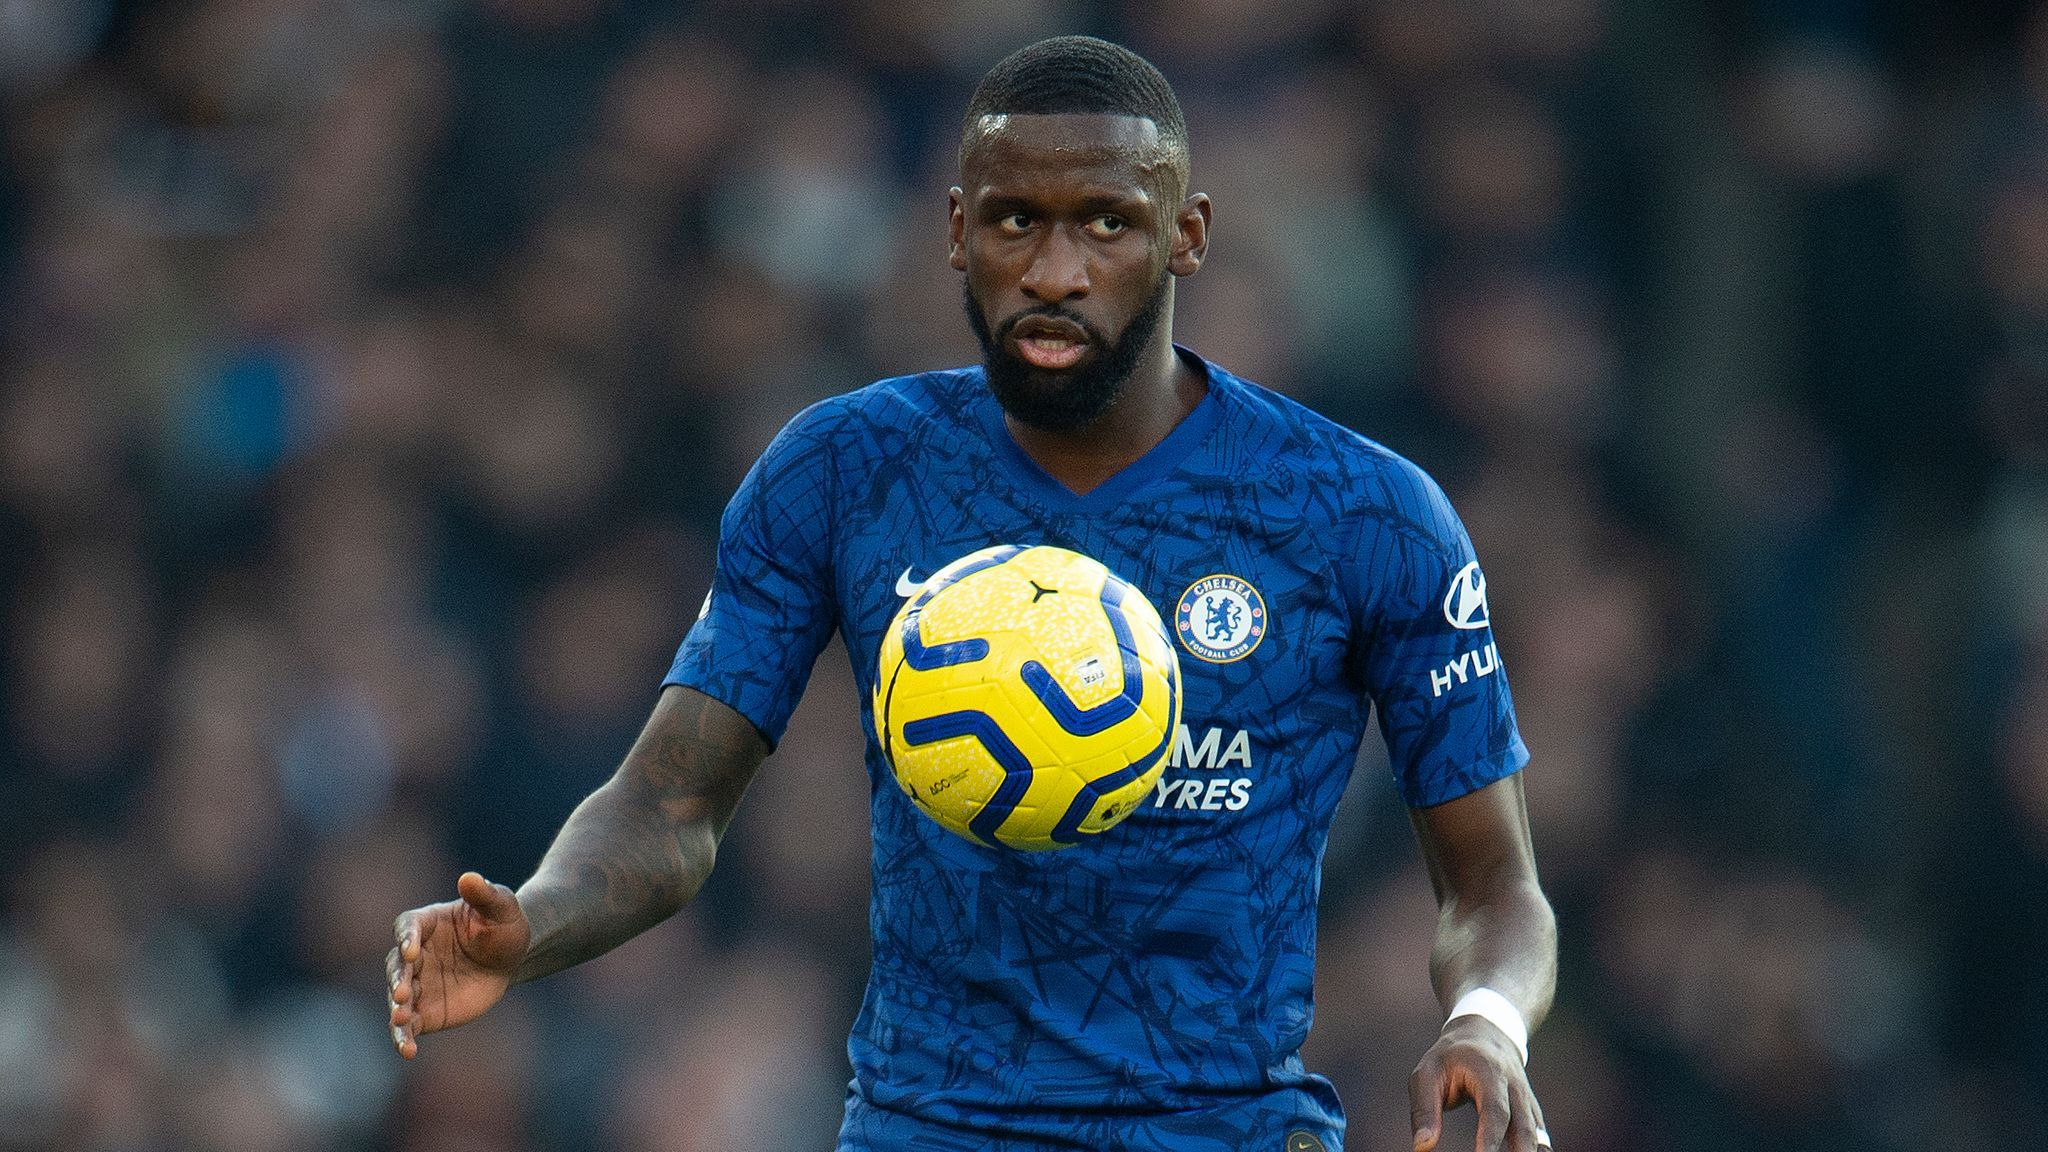 Antonio Rudiger: Chelsea defender will continue to speak out about racism